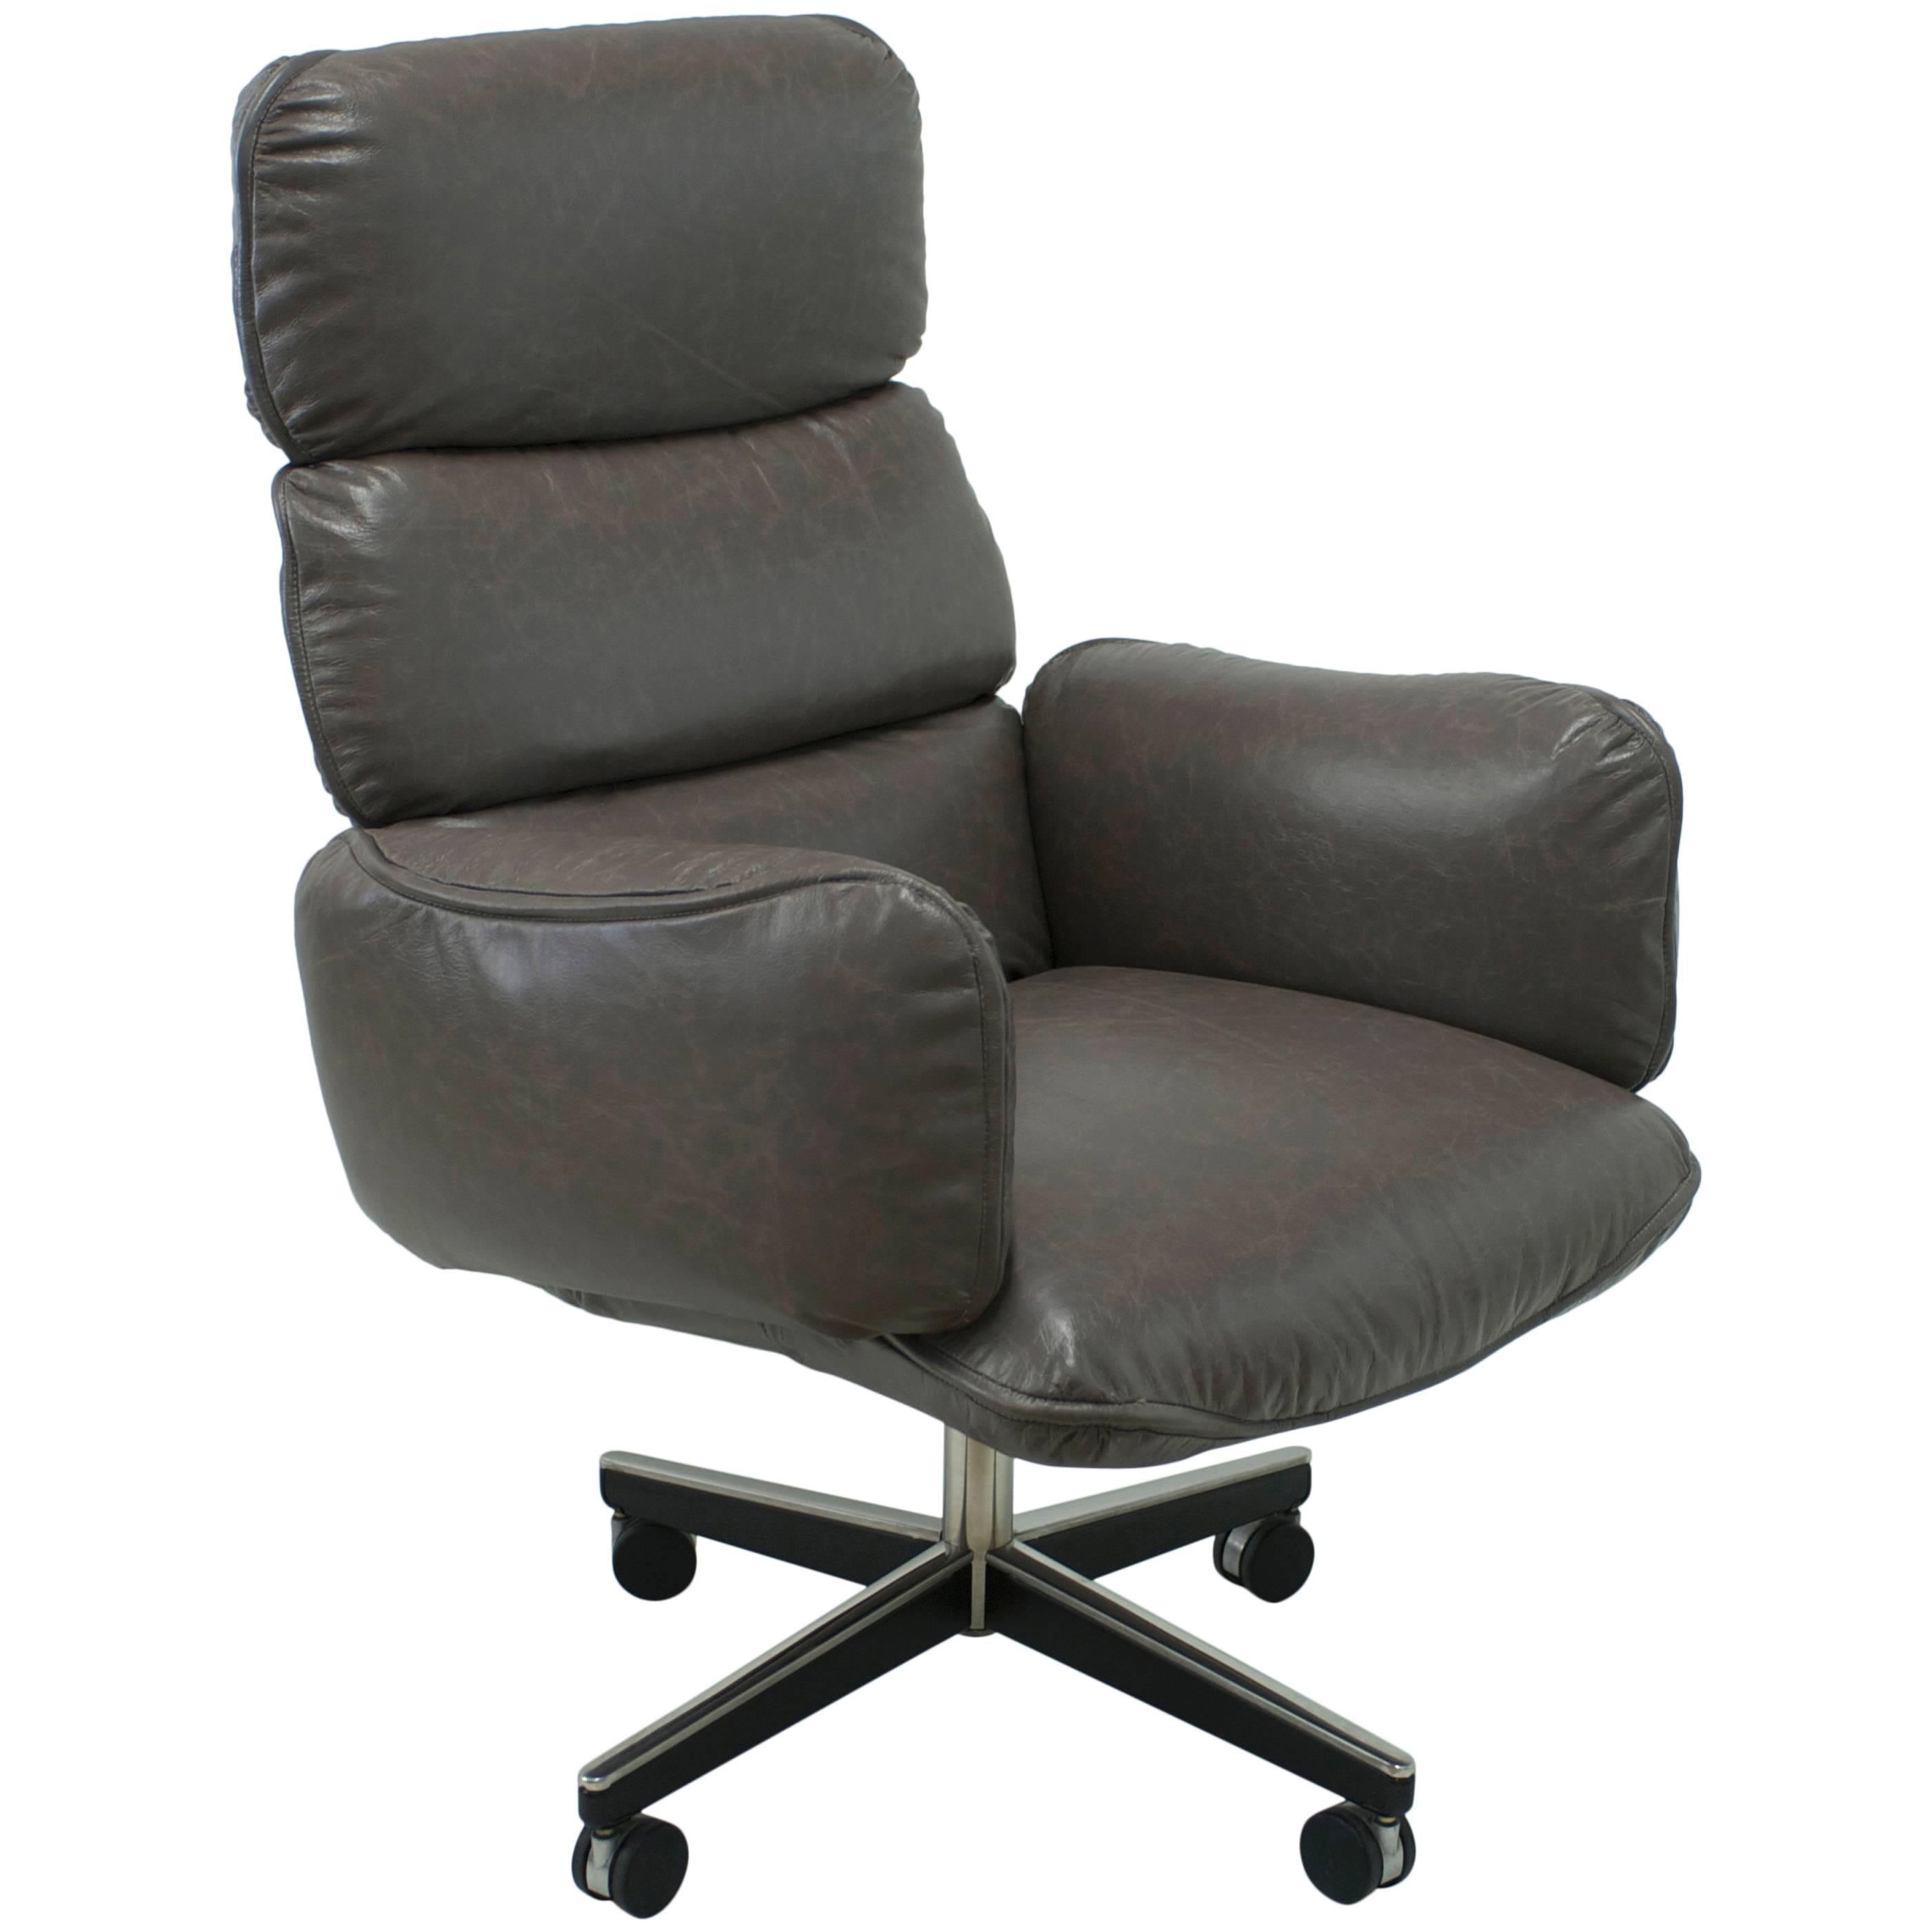 Otto Zapf for Knoll International Grey Leather Executive Desk Chair